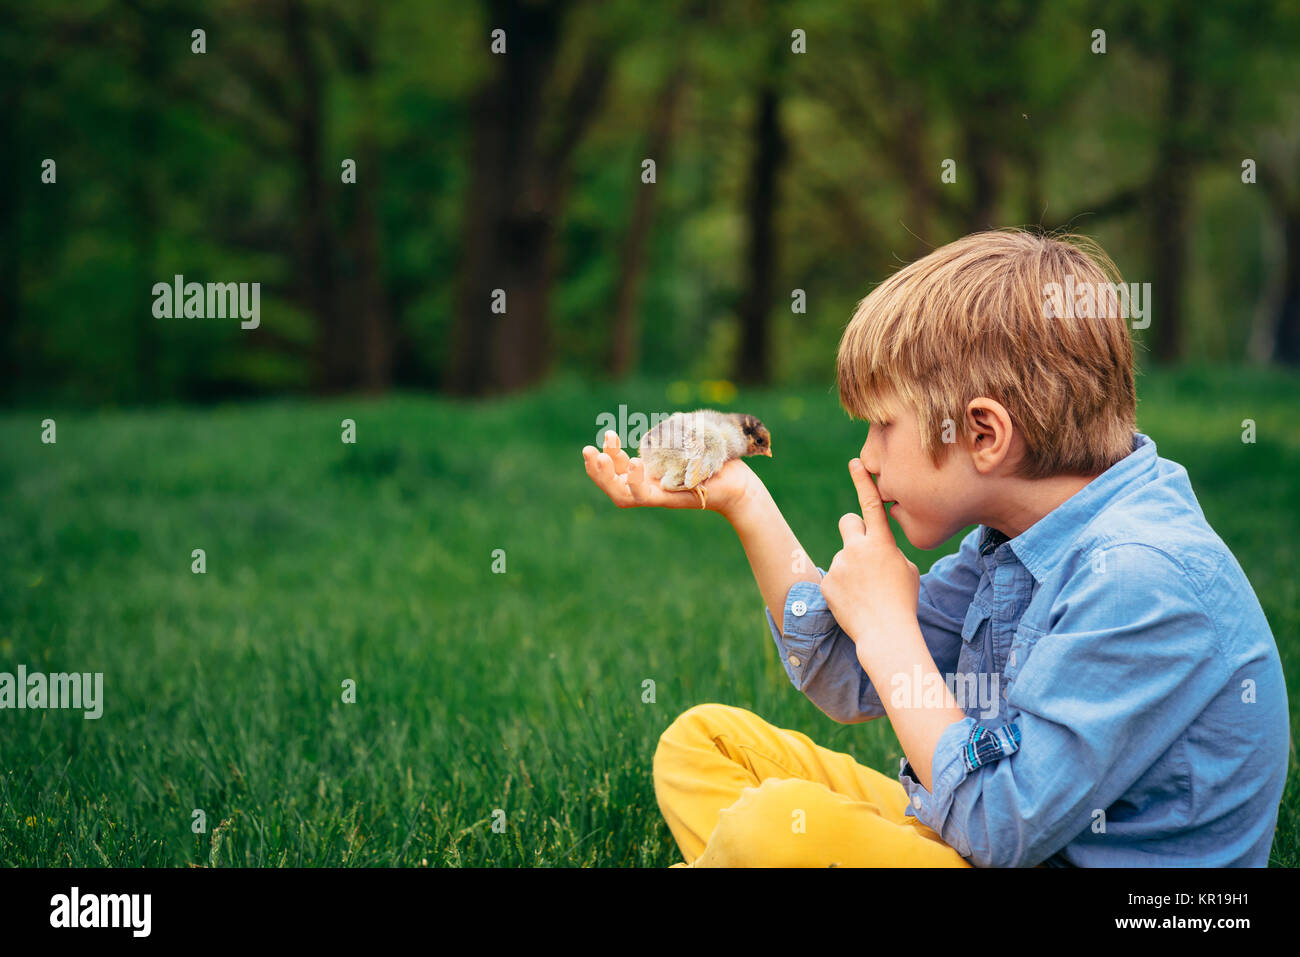 Boy sitting in garden holding a baby chick Stock Photo